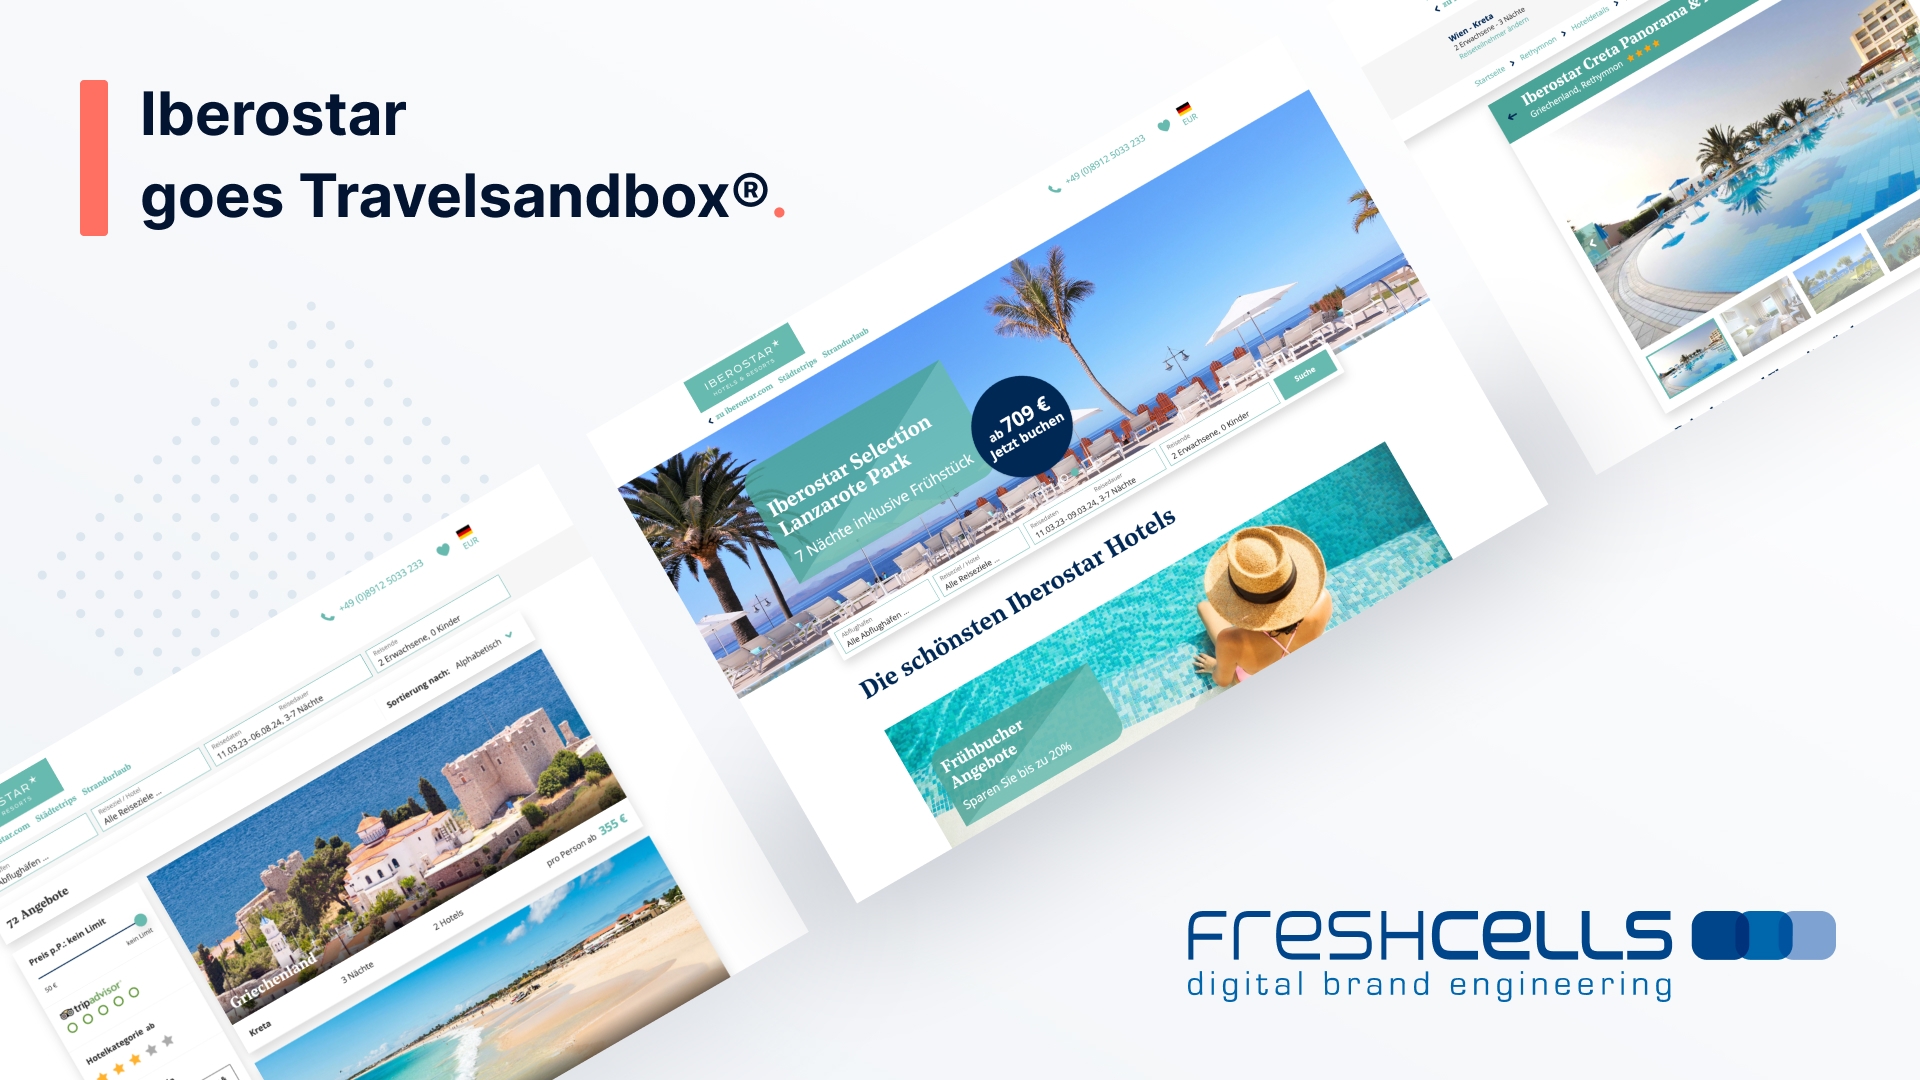 TravelSandbox from freshcells as a driver for the HLX Touristik GmbH business model